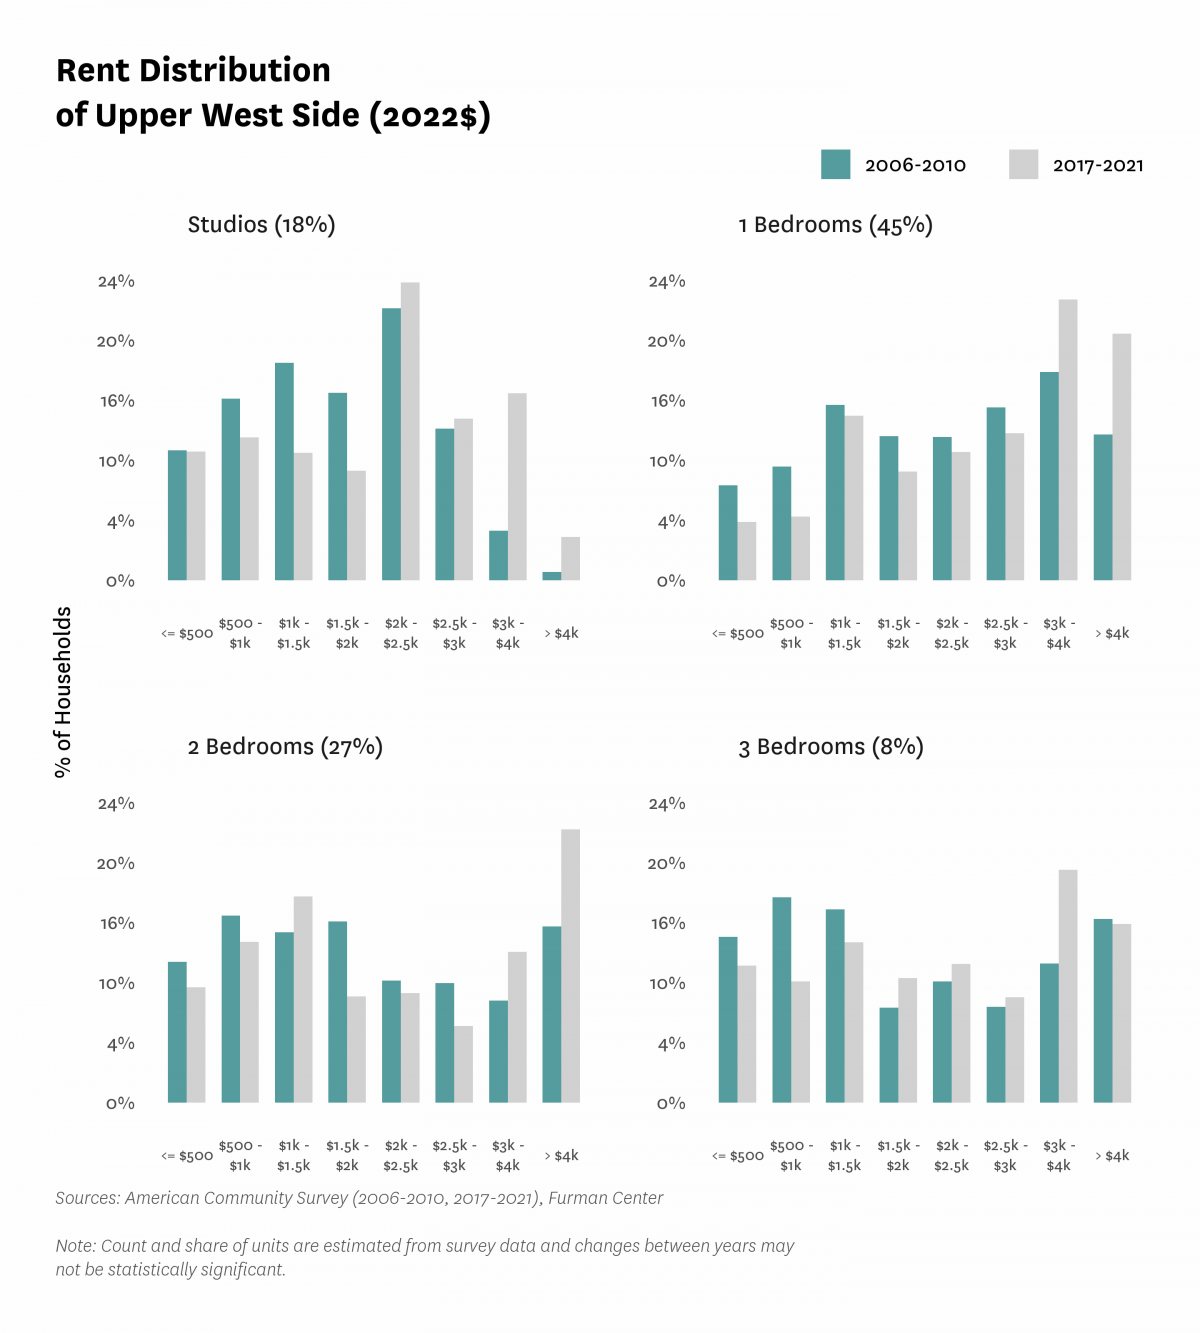 Graph showing the distribution of rents in Upper West Side in both 2010 and 2017-2021.